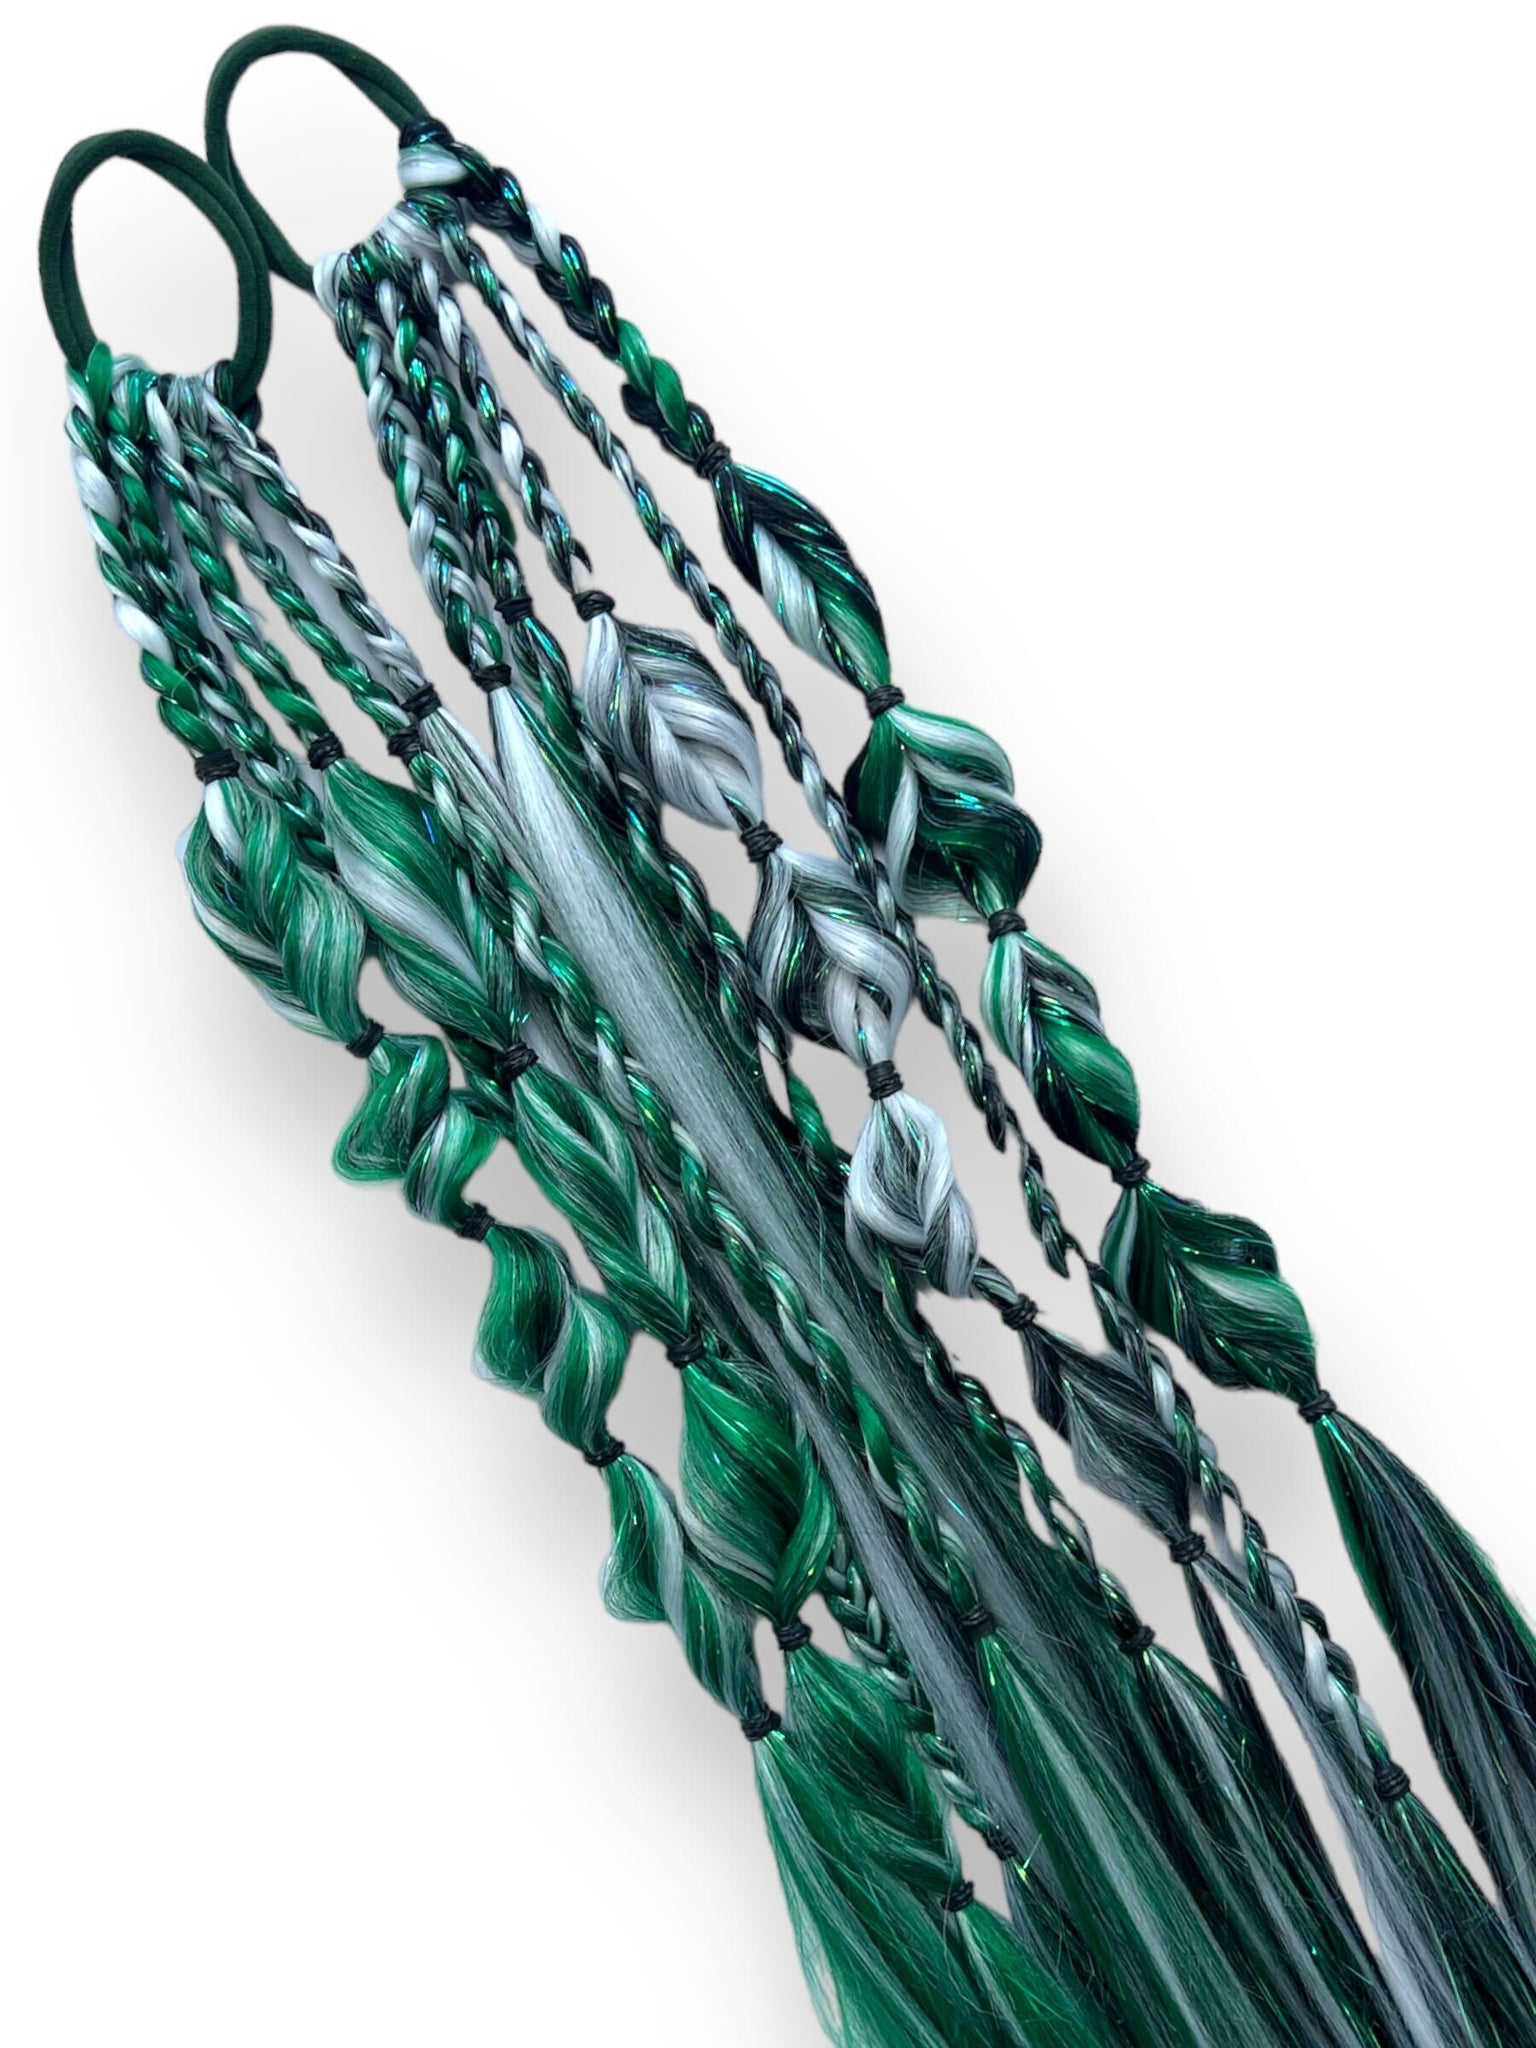 Green & White SPORTS - Tie-In Braid Extension Set of 2